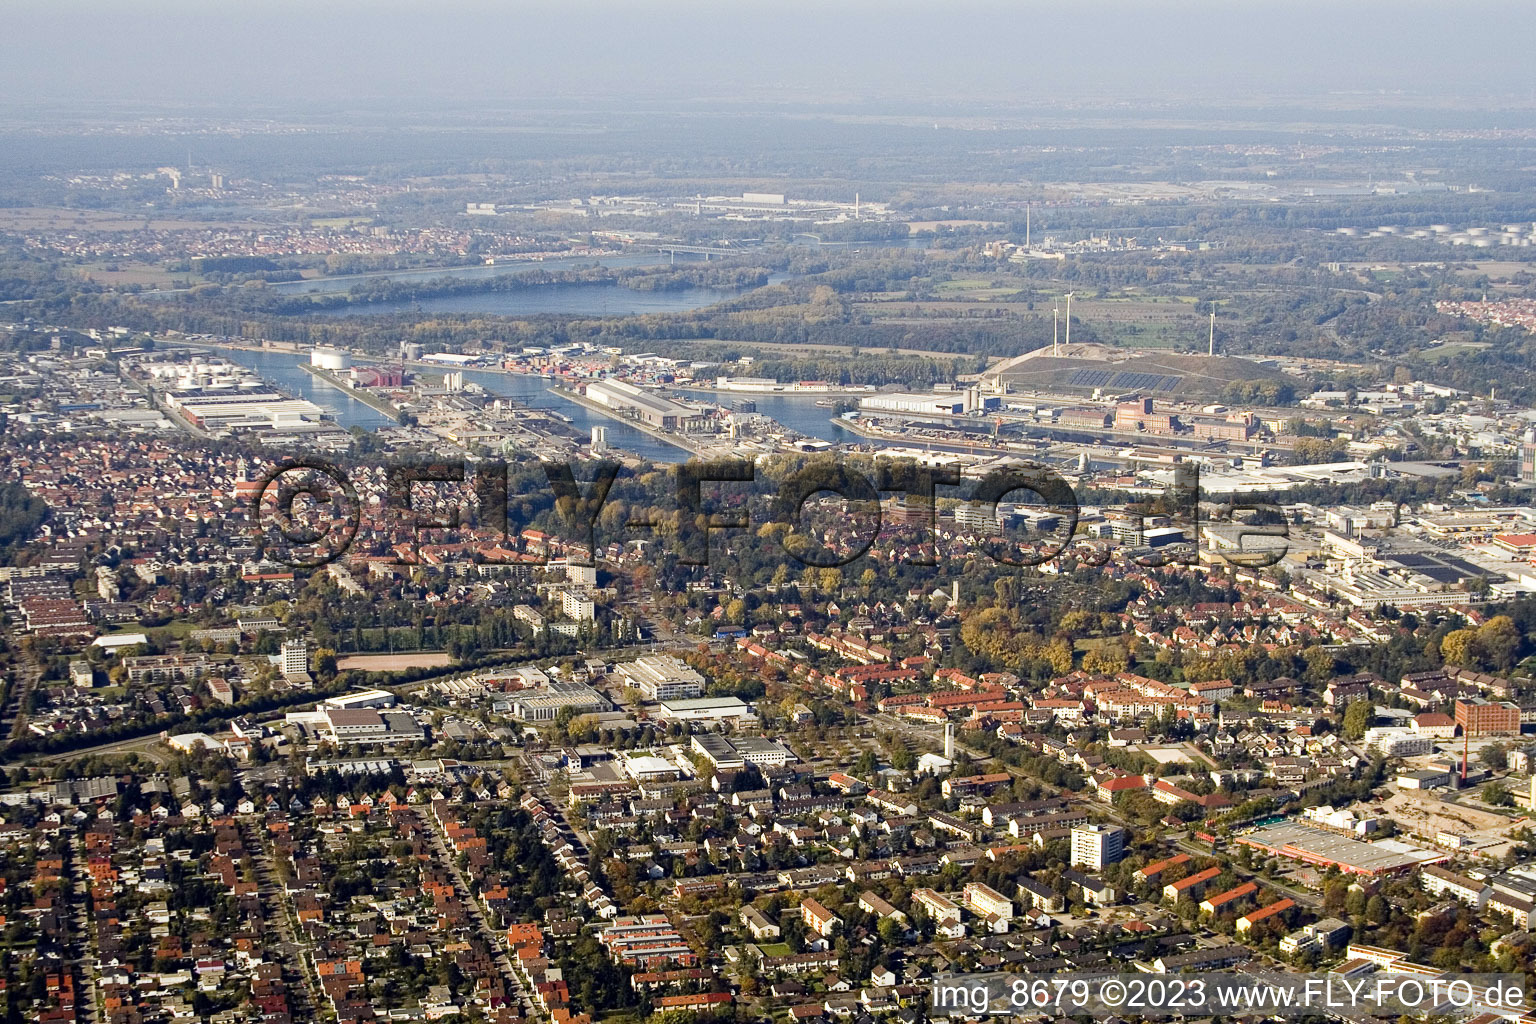 Grünwinkel and harbor from the east in the district Daxlanden in Karlsruhe in the state Baden-Wuerttemberg, Germany